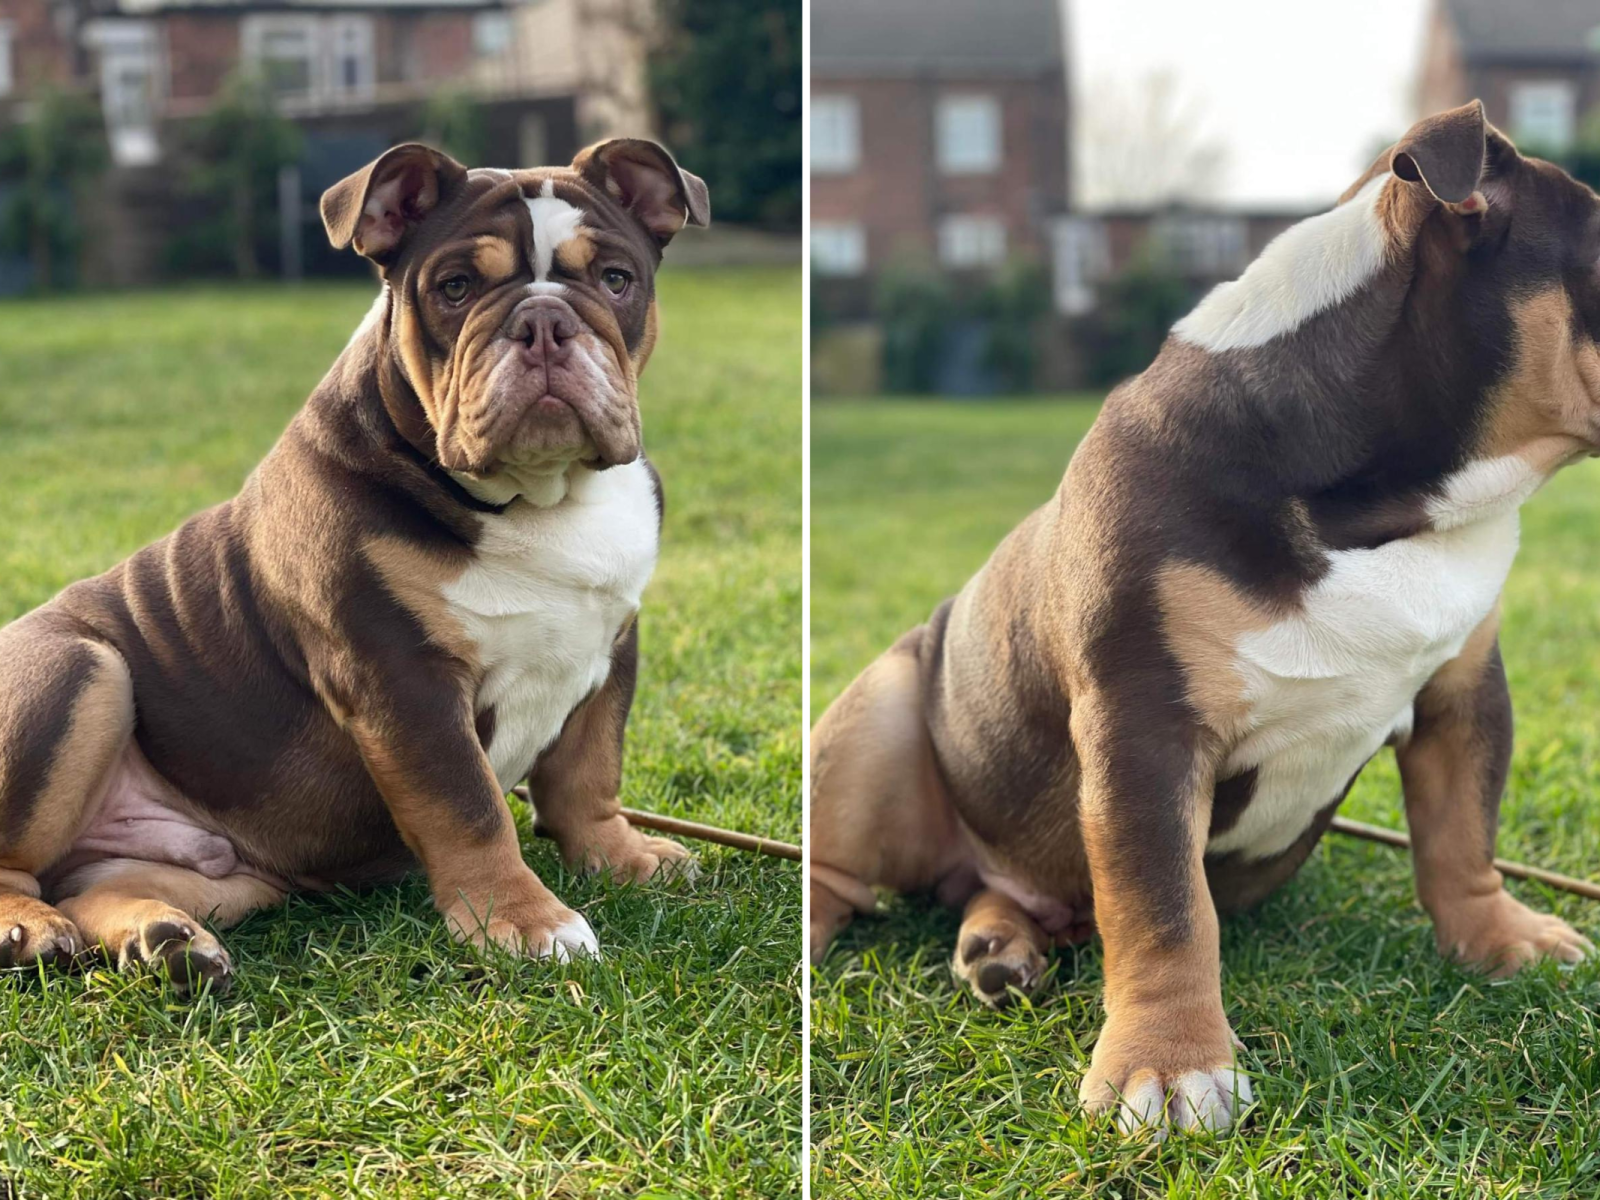 Internet in Stitches at Bulldog's Way of Getting Out of Walkies: 'Stubborn